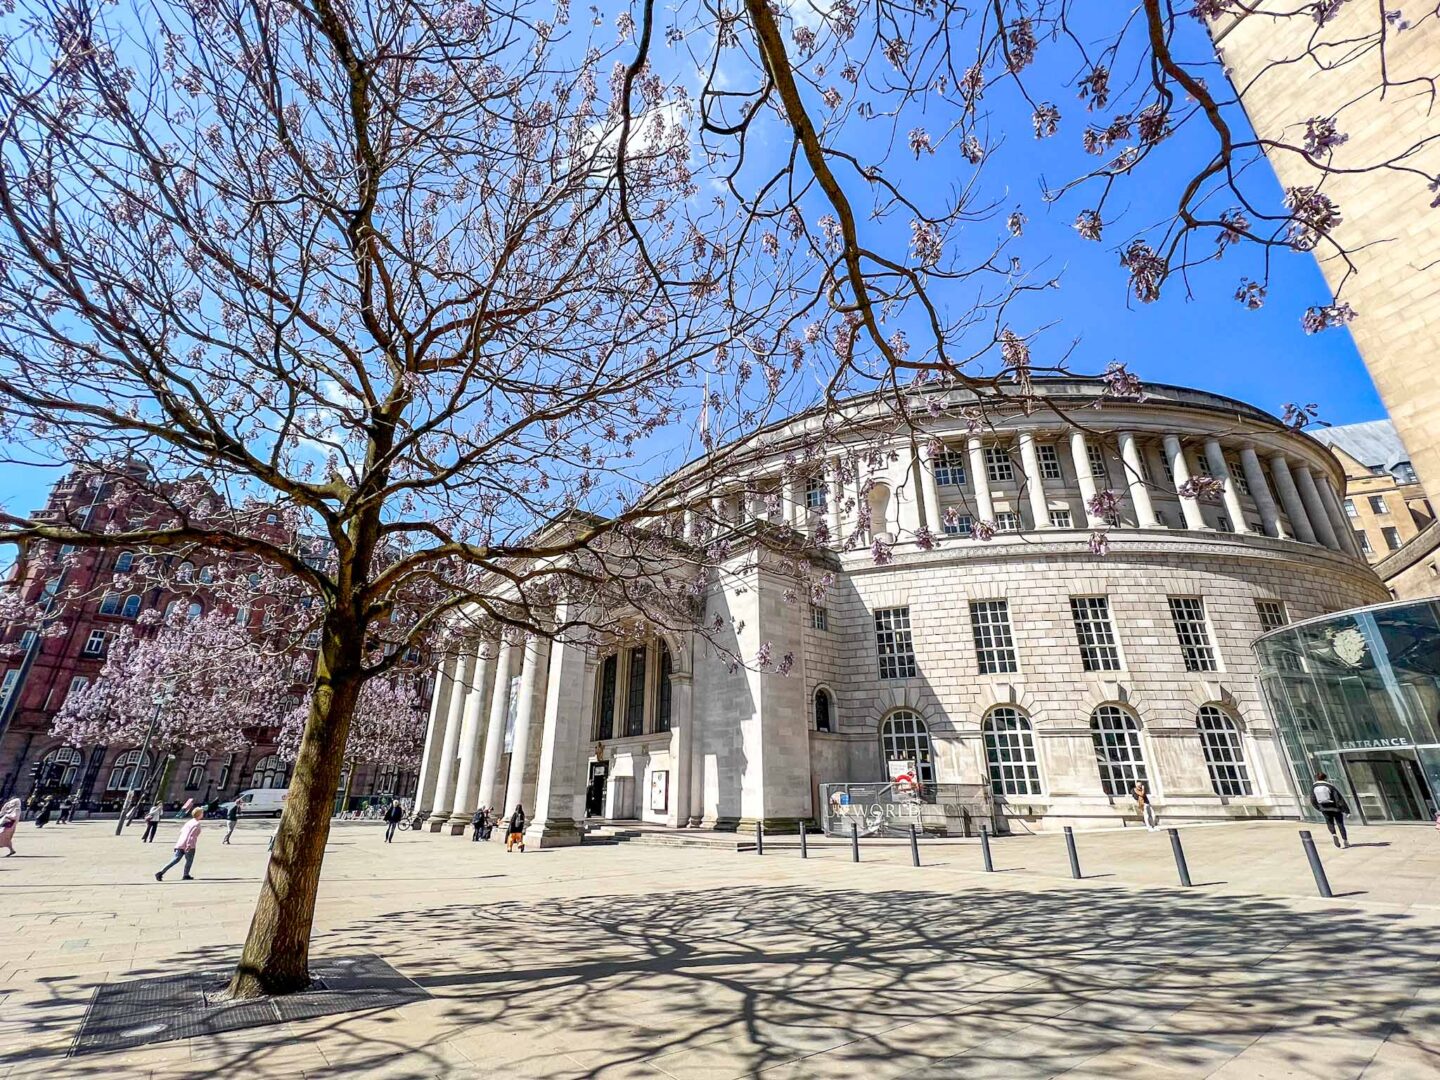 Cherry blossom Manchester, Manchester Library and St Peters Square with purple blossom in spring